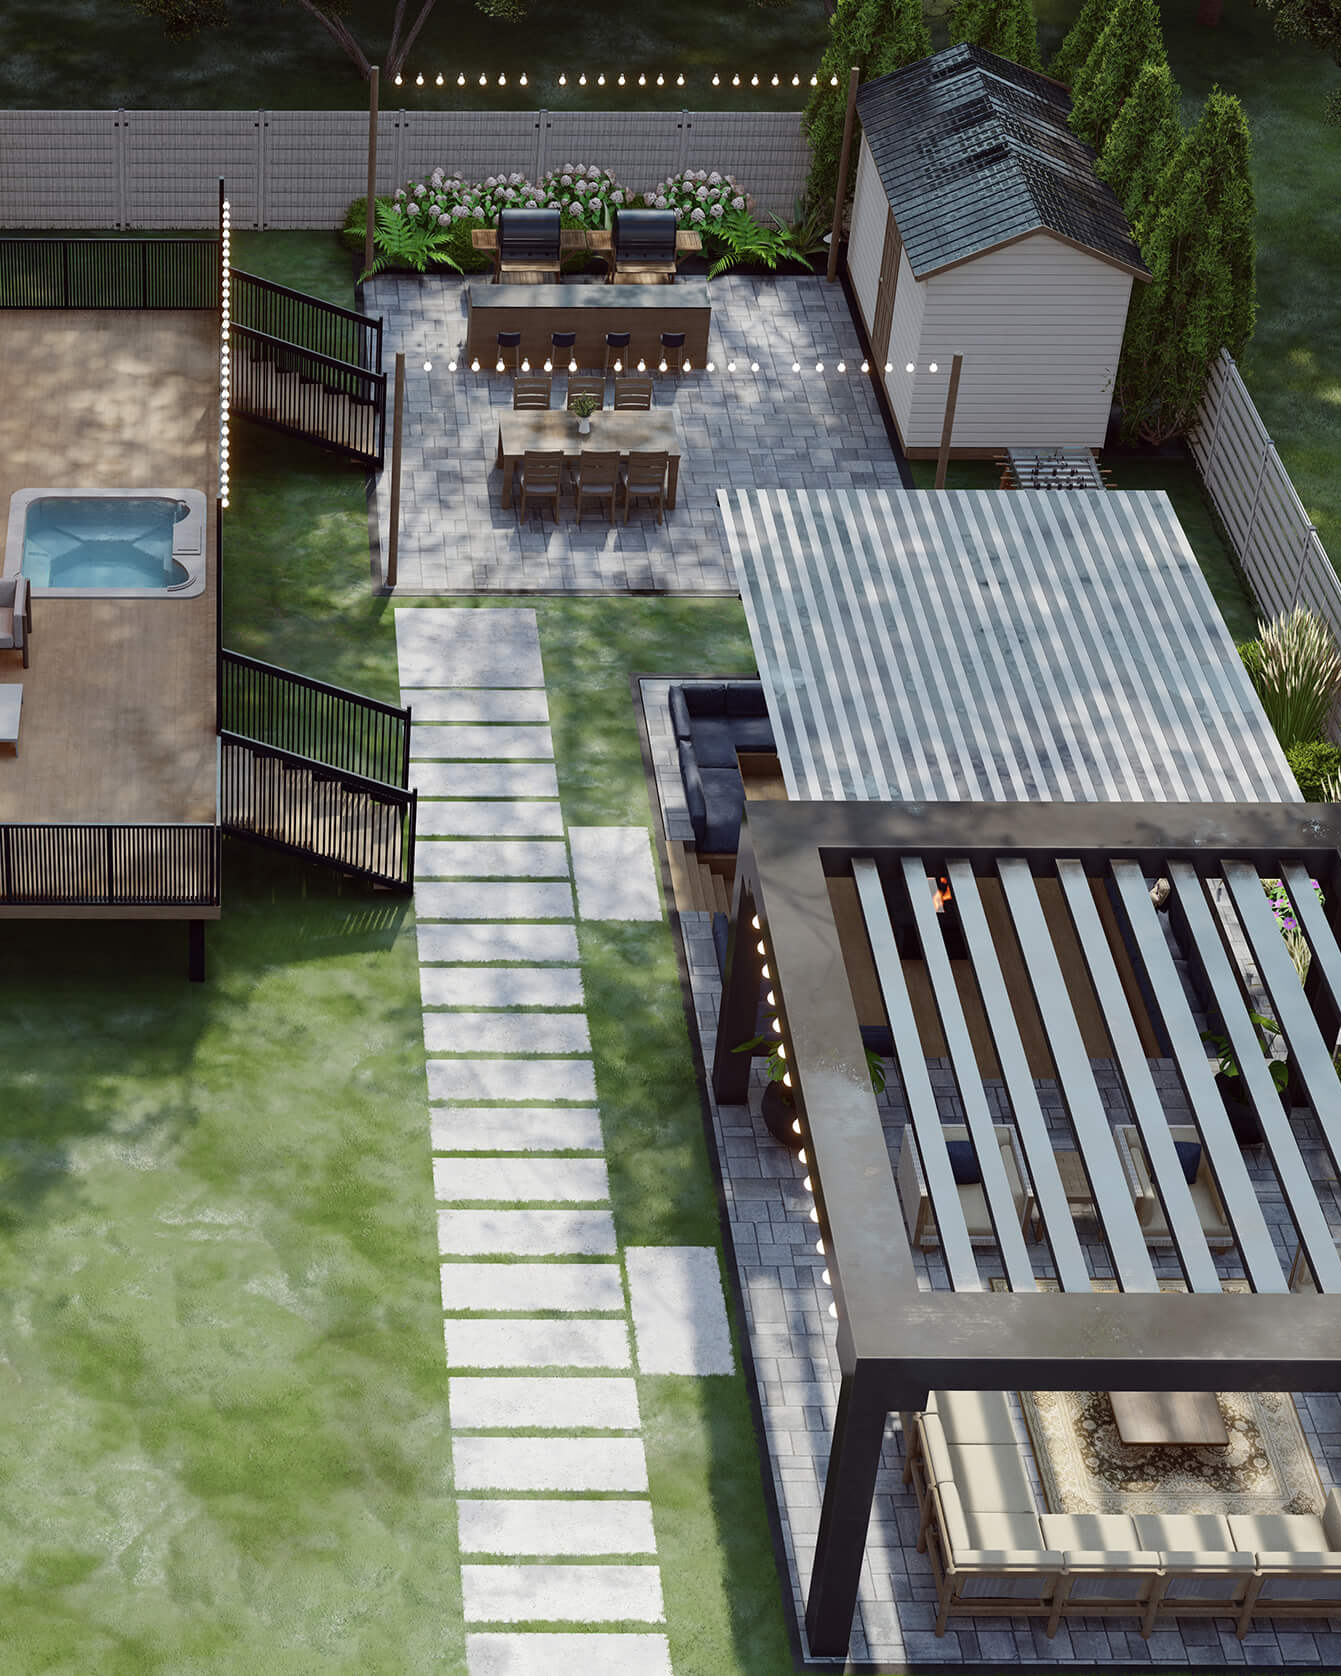 Overhead view of a structured backyard with tiled paths, an outdoor dining area, seating spaces, and surrounding greenery.